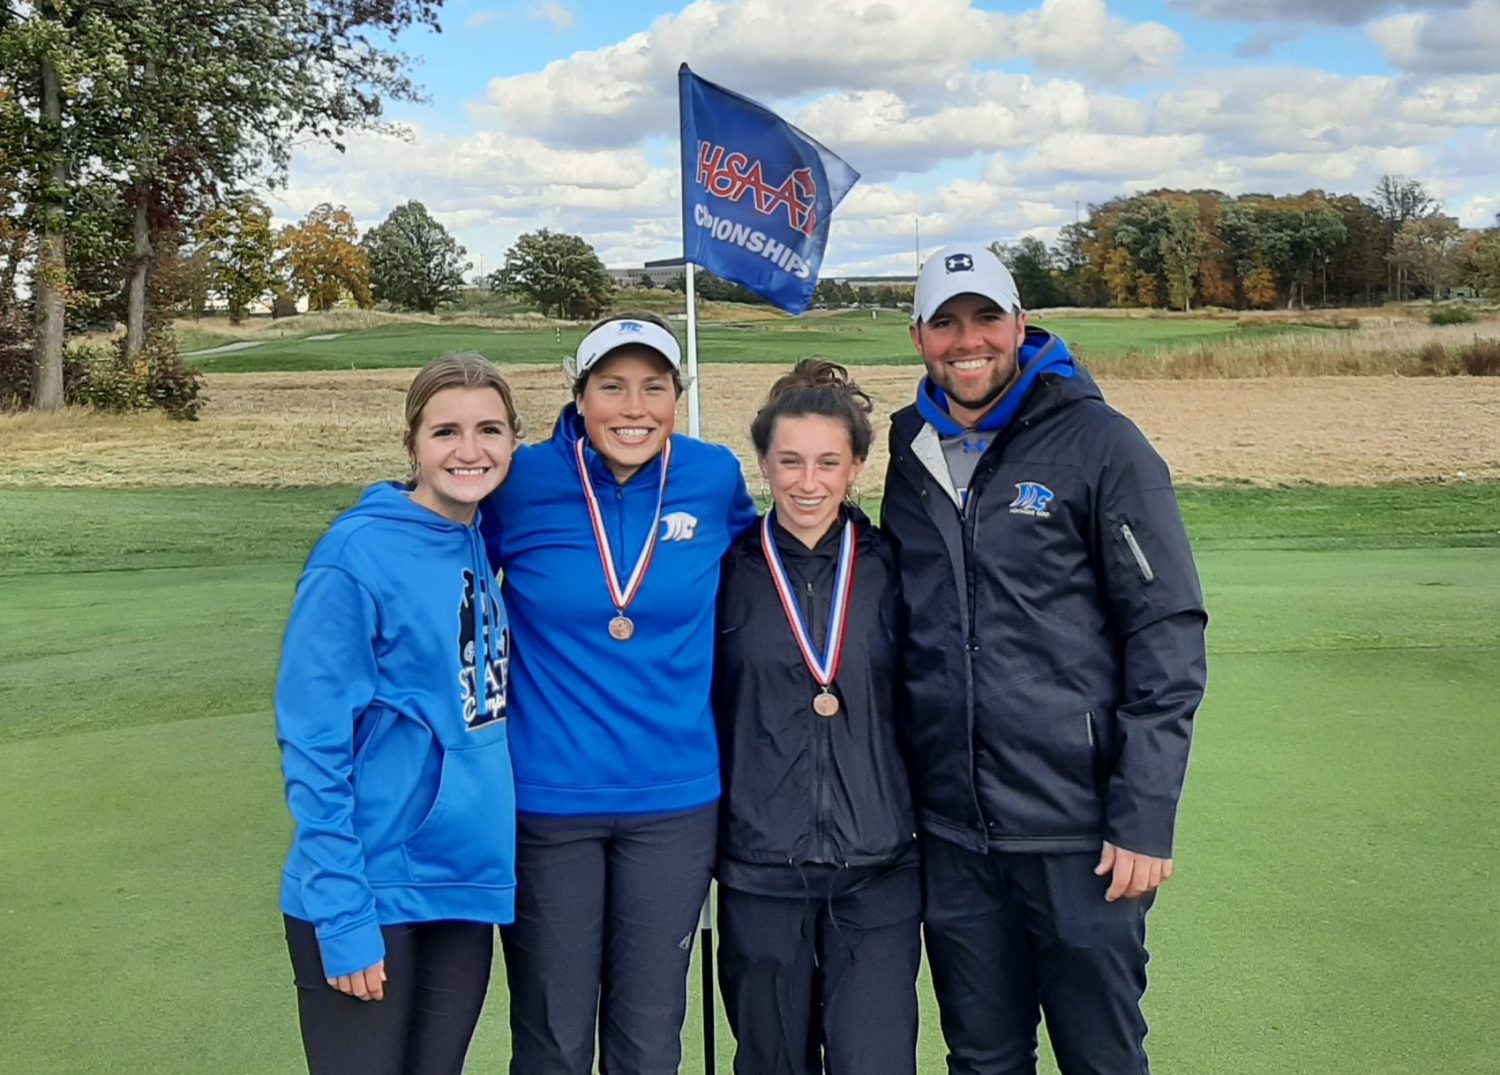 Area girls earn all-state honors in golf for recently completed season